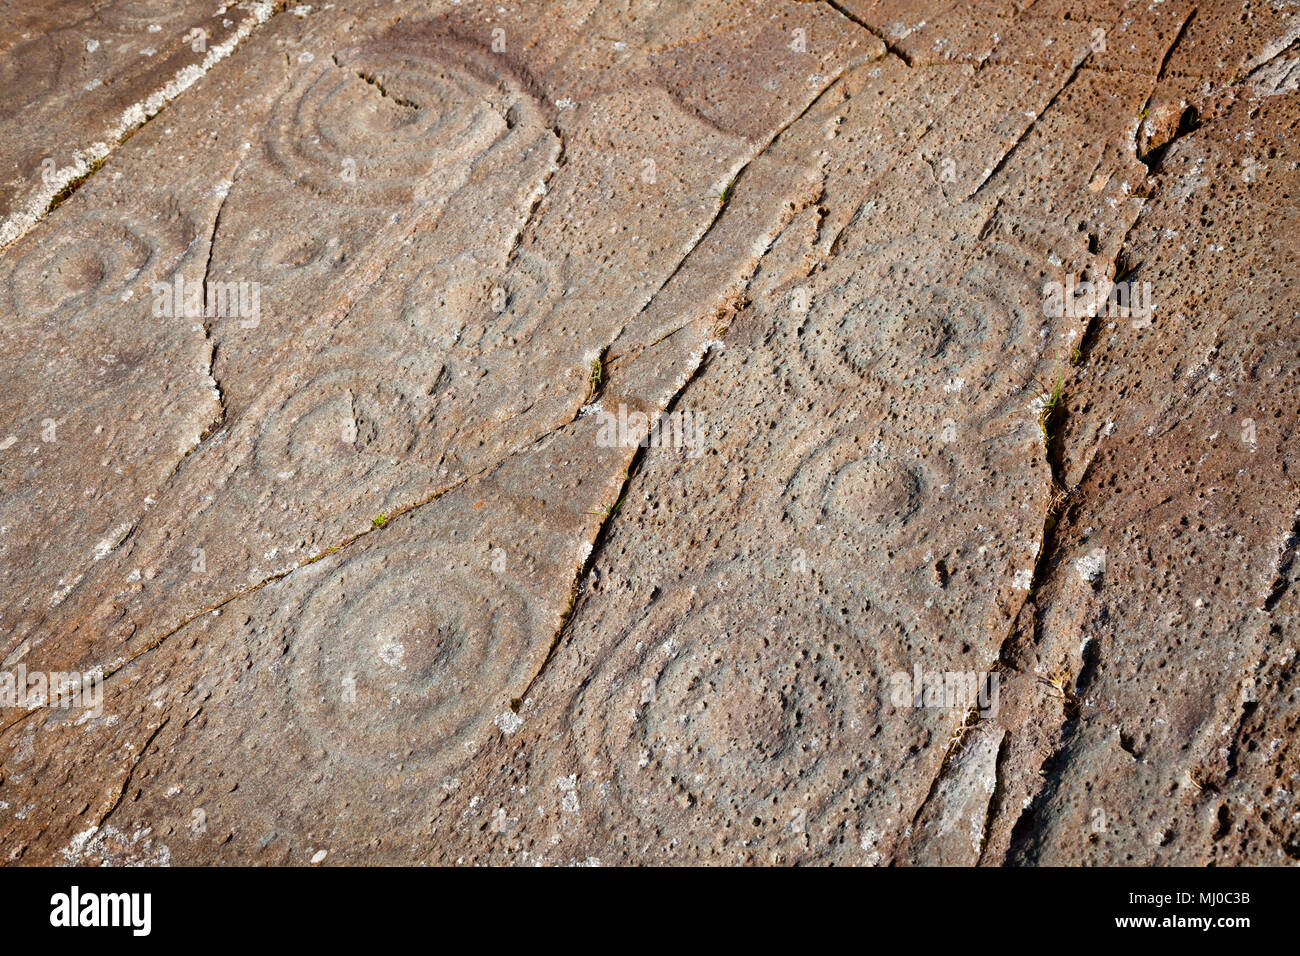 Cup and rings marks on a stone dating from the Iron Age at Cairnbaan prehistoric site, Argyll and Bute, Scotland, UK Stock Photo